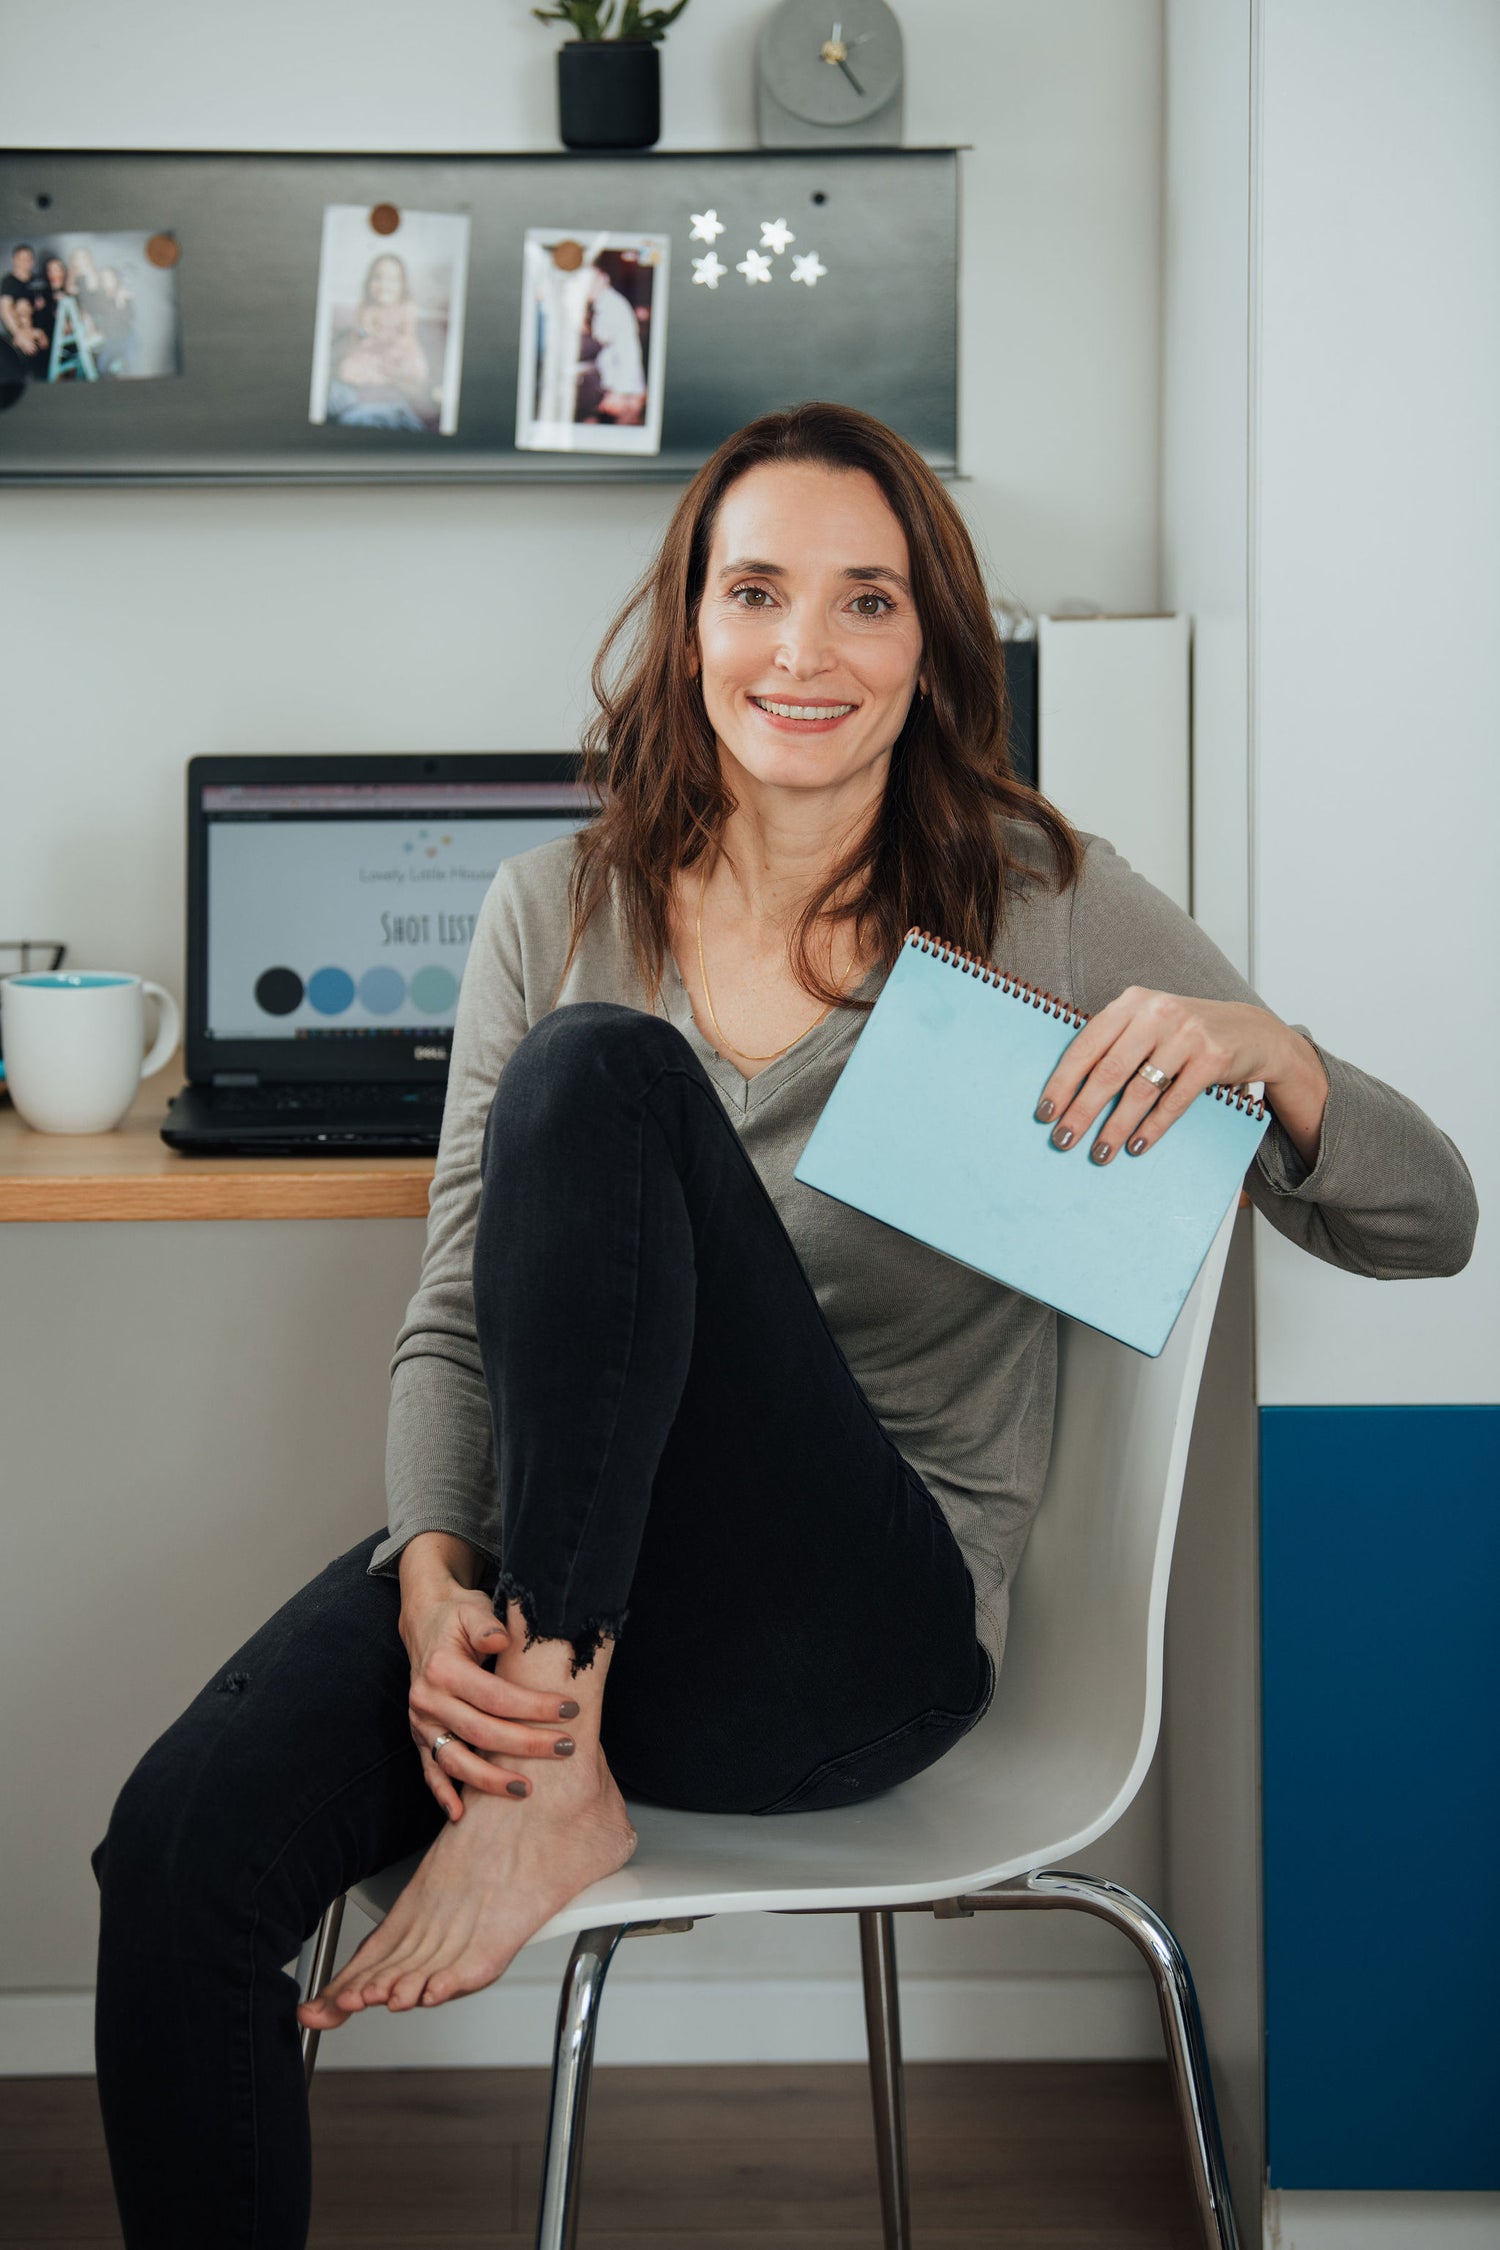 Adi Ben Zeev, the founder of Lovely Little House, sits smiling by her desk